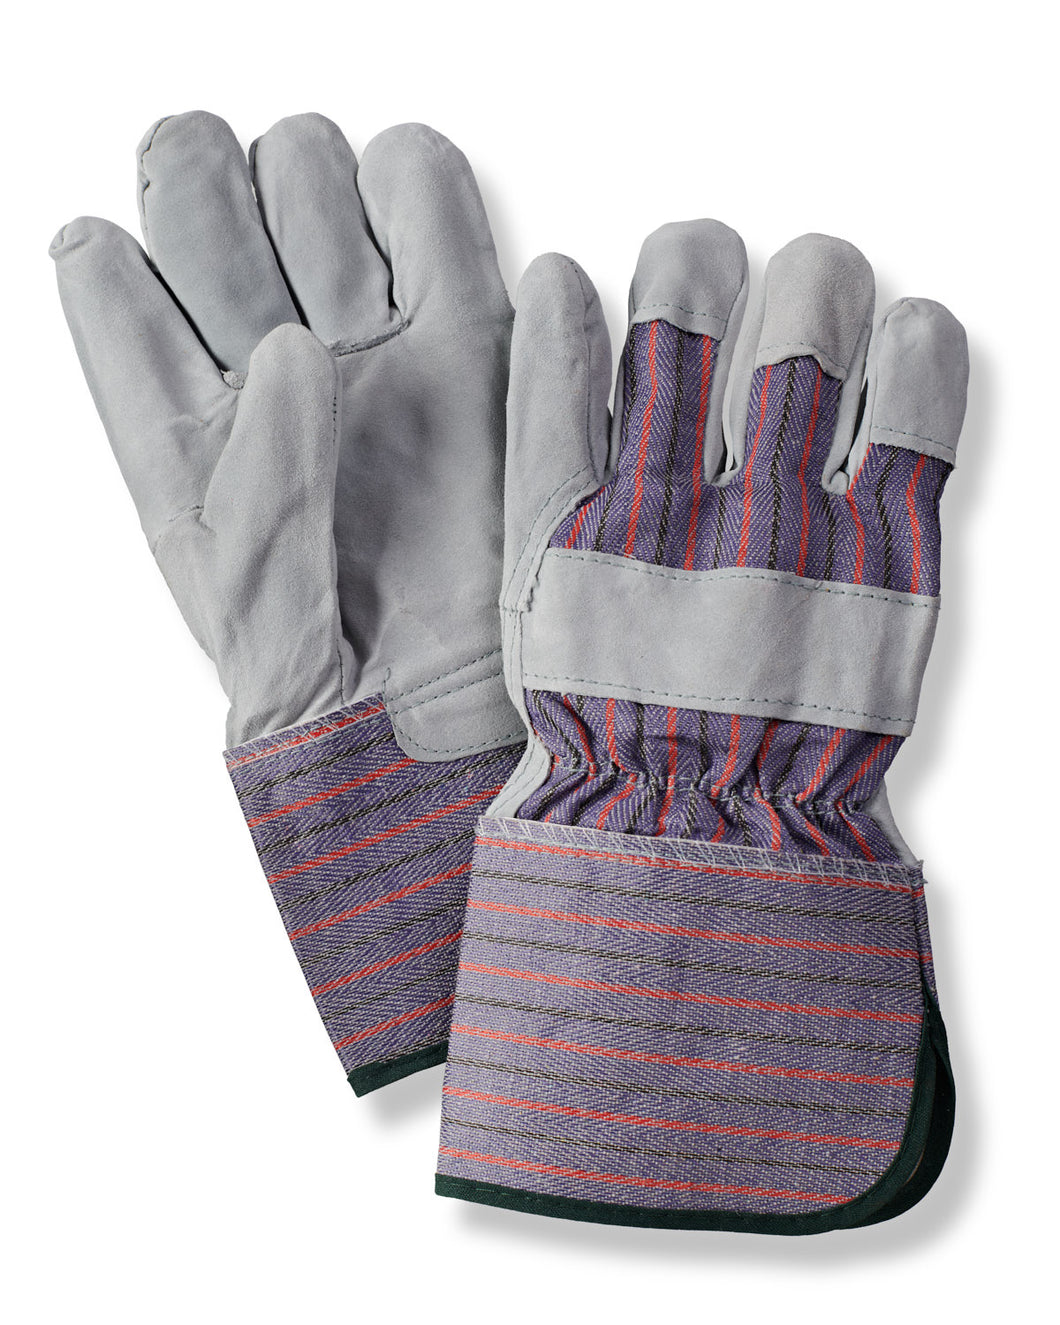 Work Gloves with Safety Cuff 12 Pack